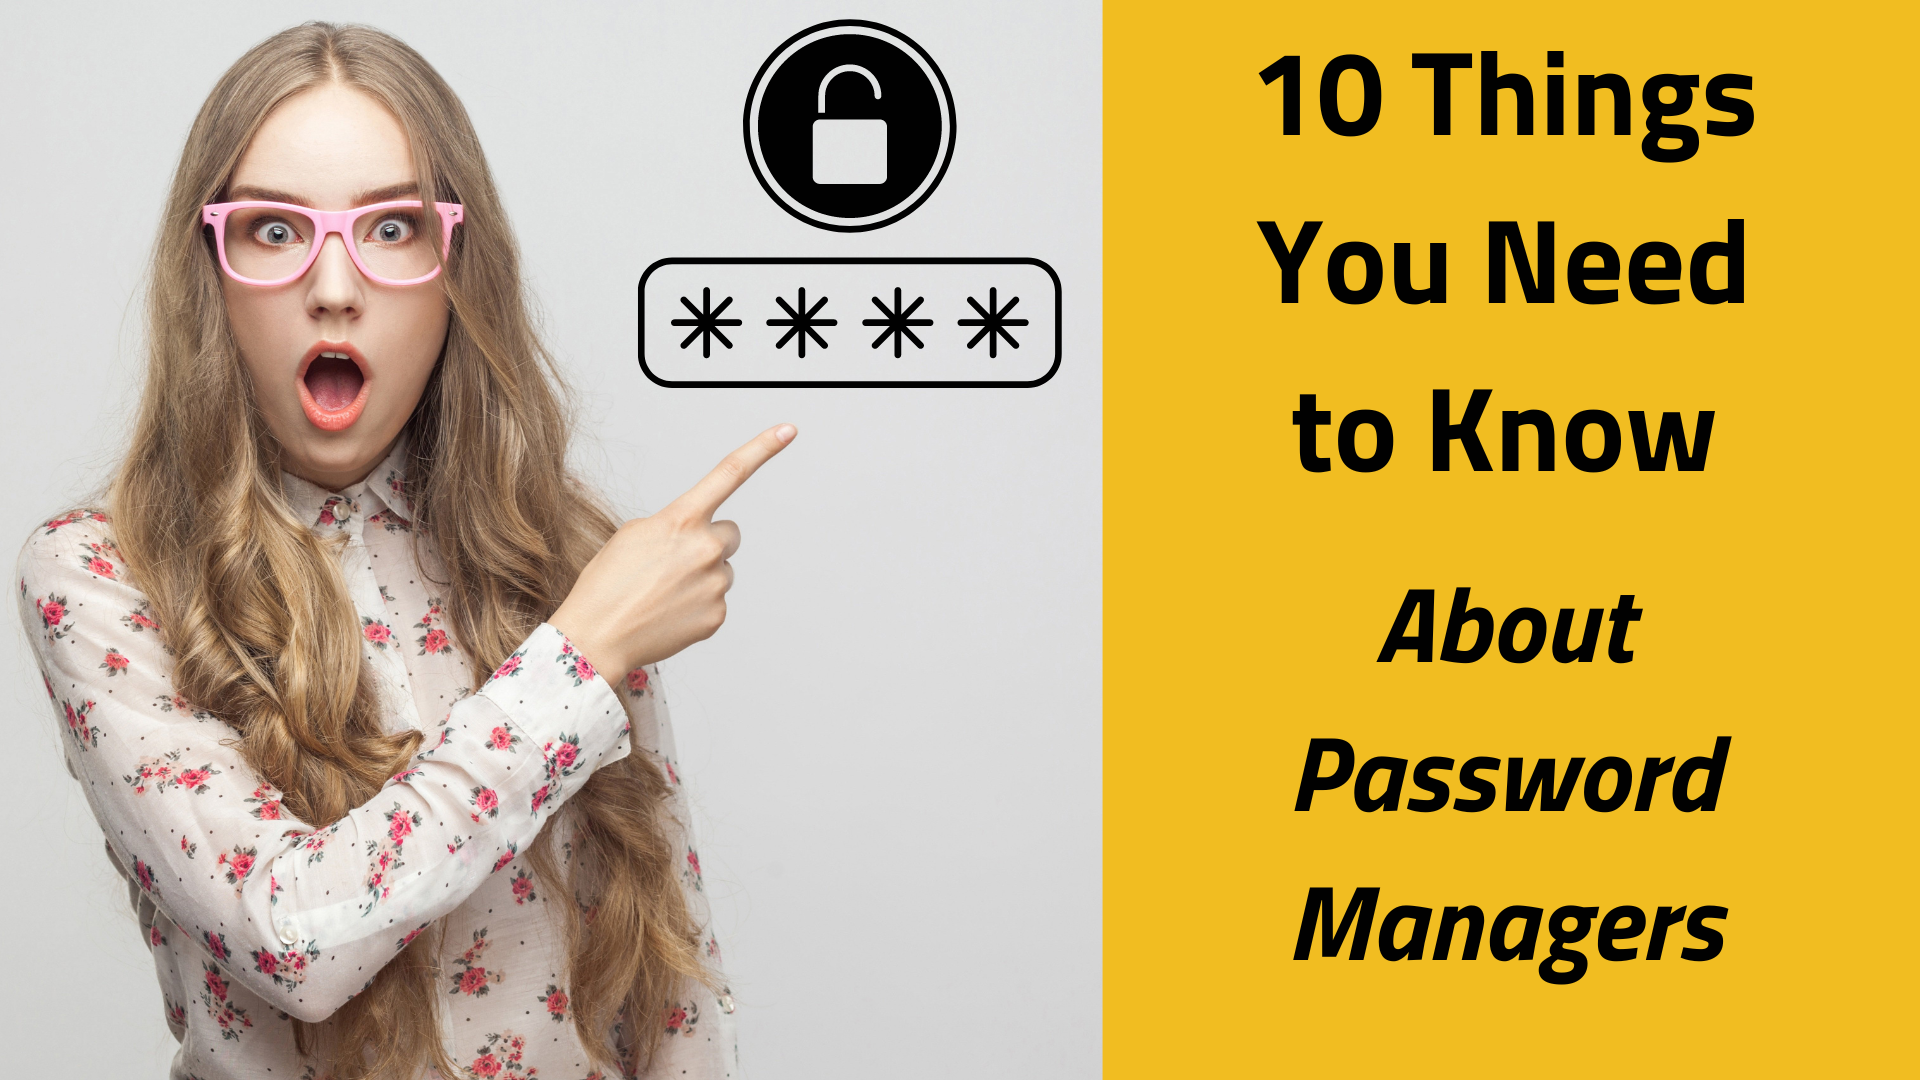 10 Things You Need to Know About Password Managers